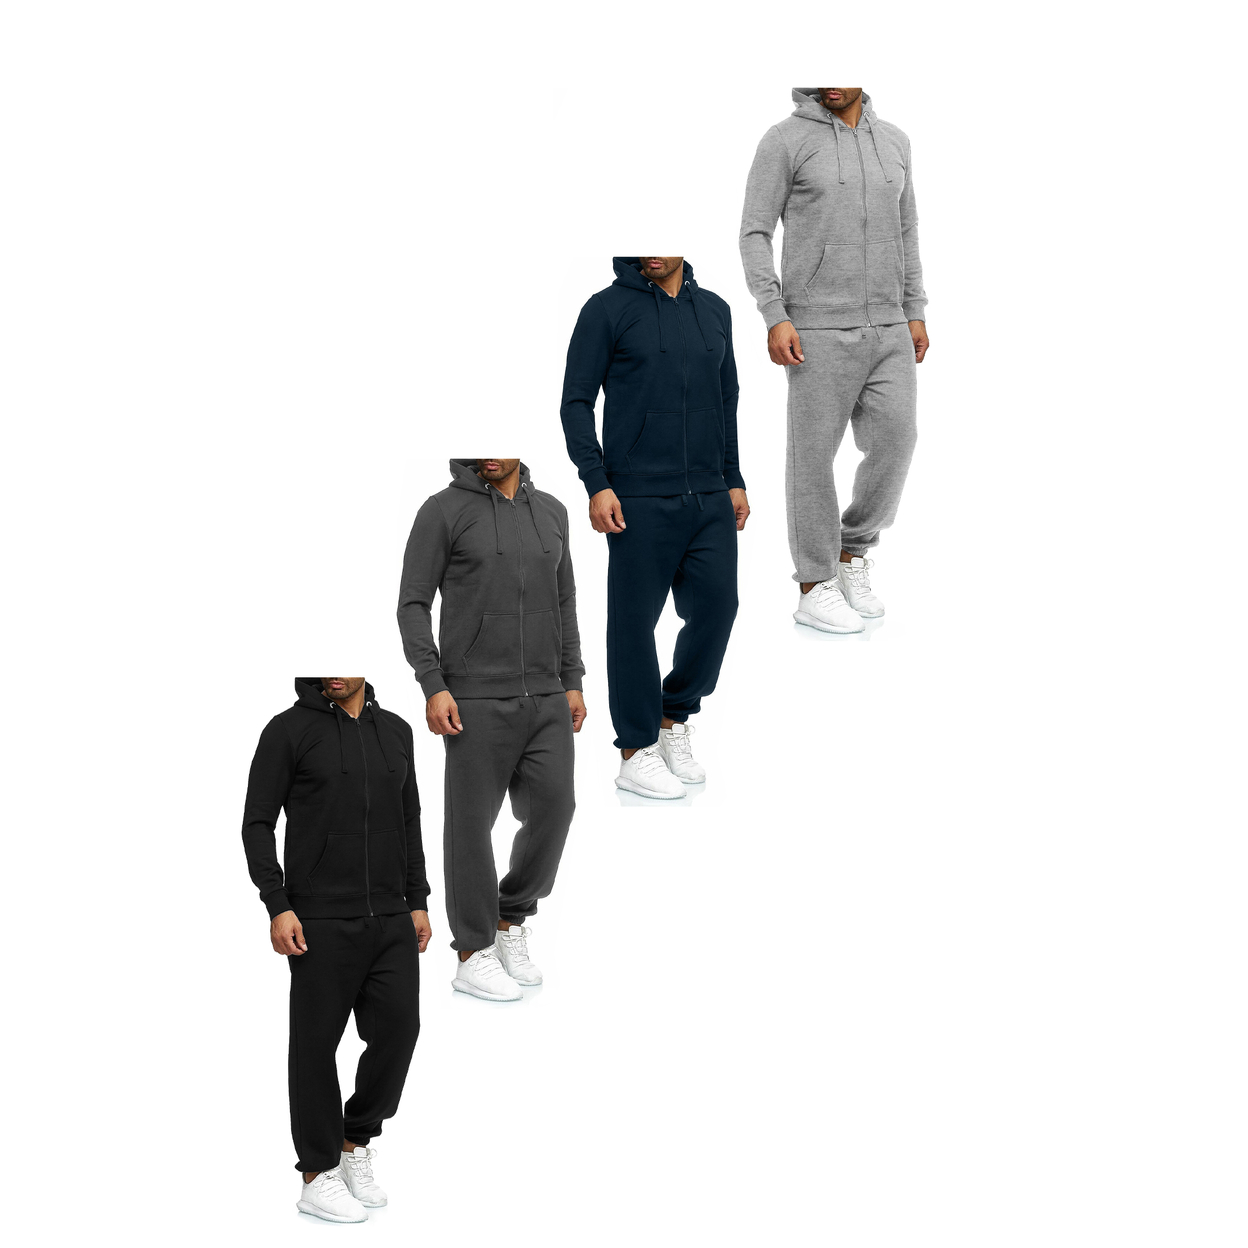 2-Pack: Men's Casual Big & Tall Athletic Active Winter Warm Fleece Lined Full Zip Tracksuit Jogger Set - Grey, X-large